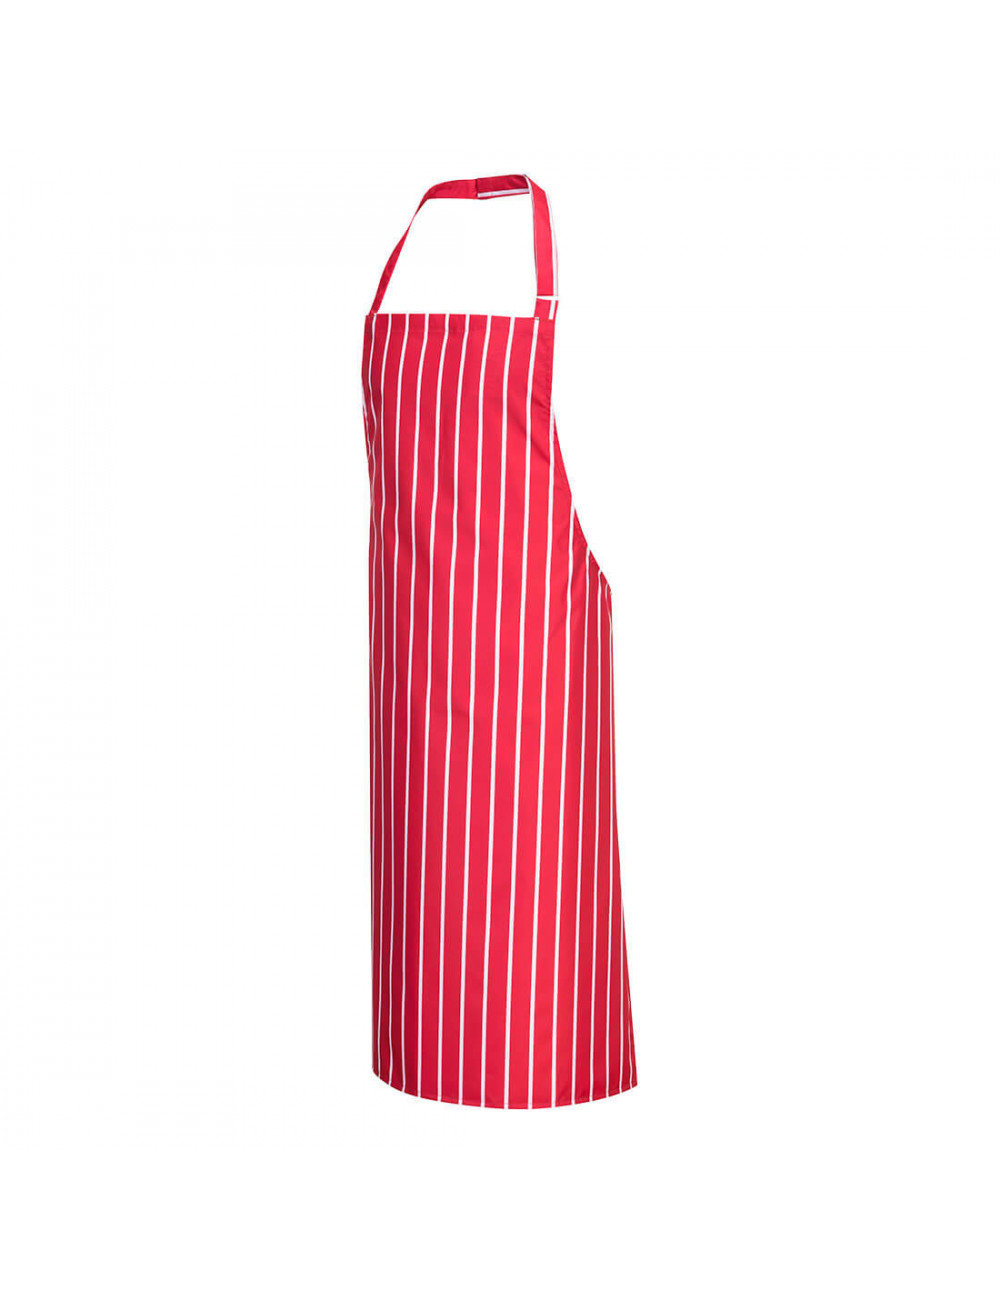 Waterproof apron red Portwest